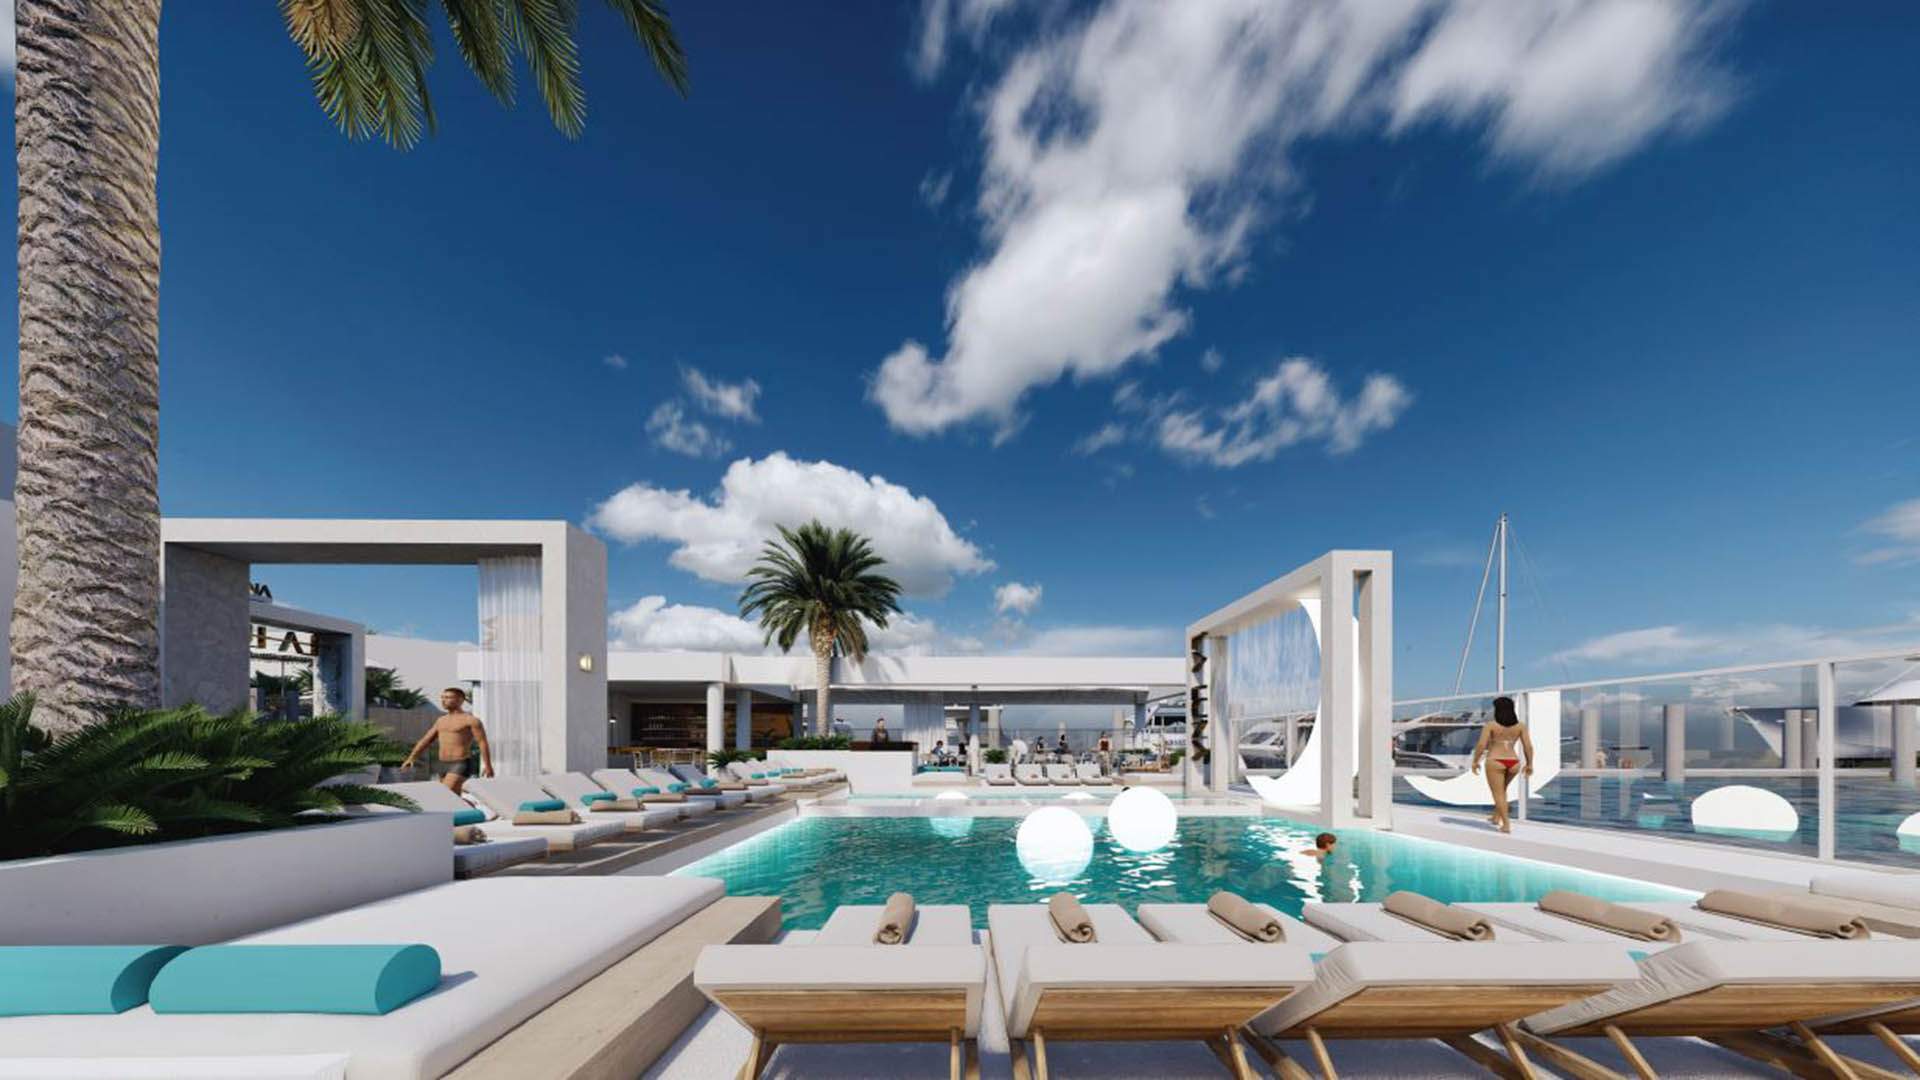 Australia's First European-Inspired Floating Beach Club Is Opening on the Gold Coast in 2022